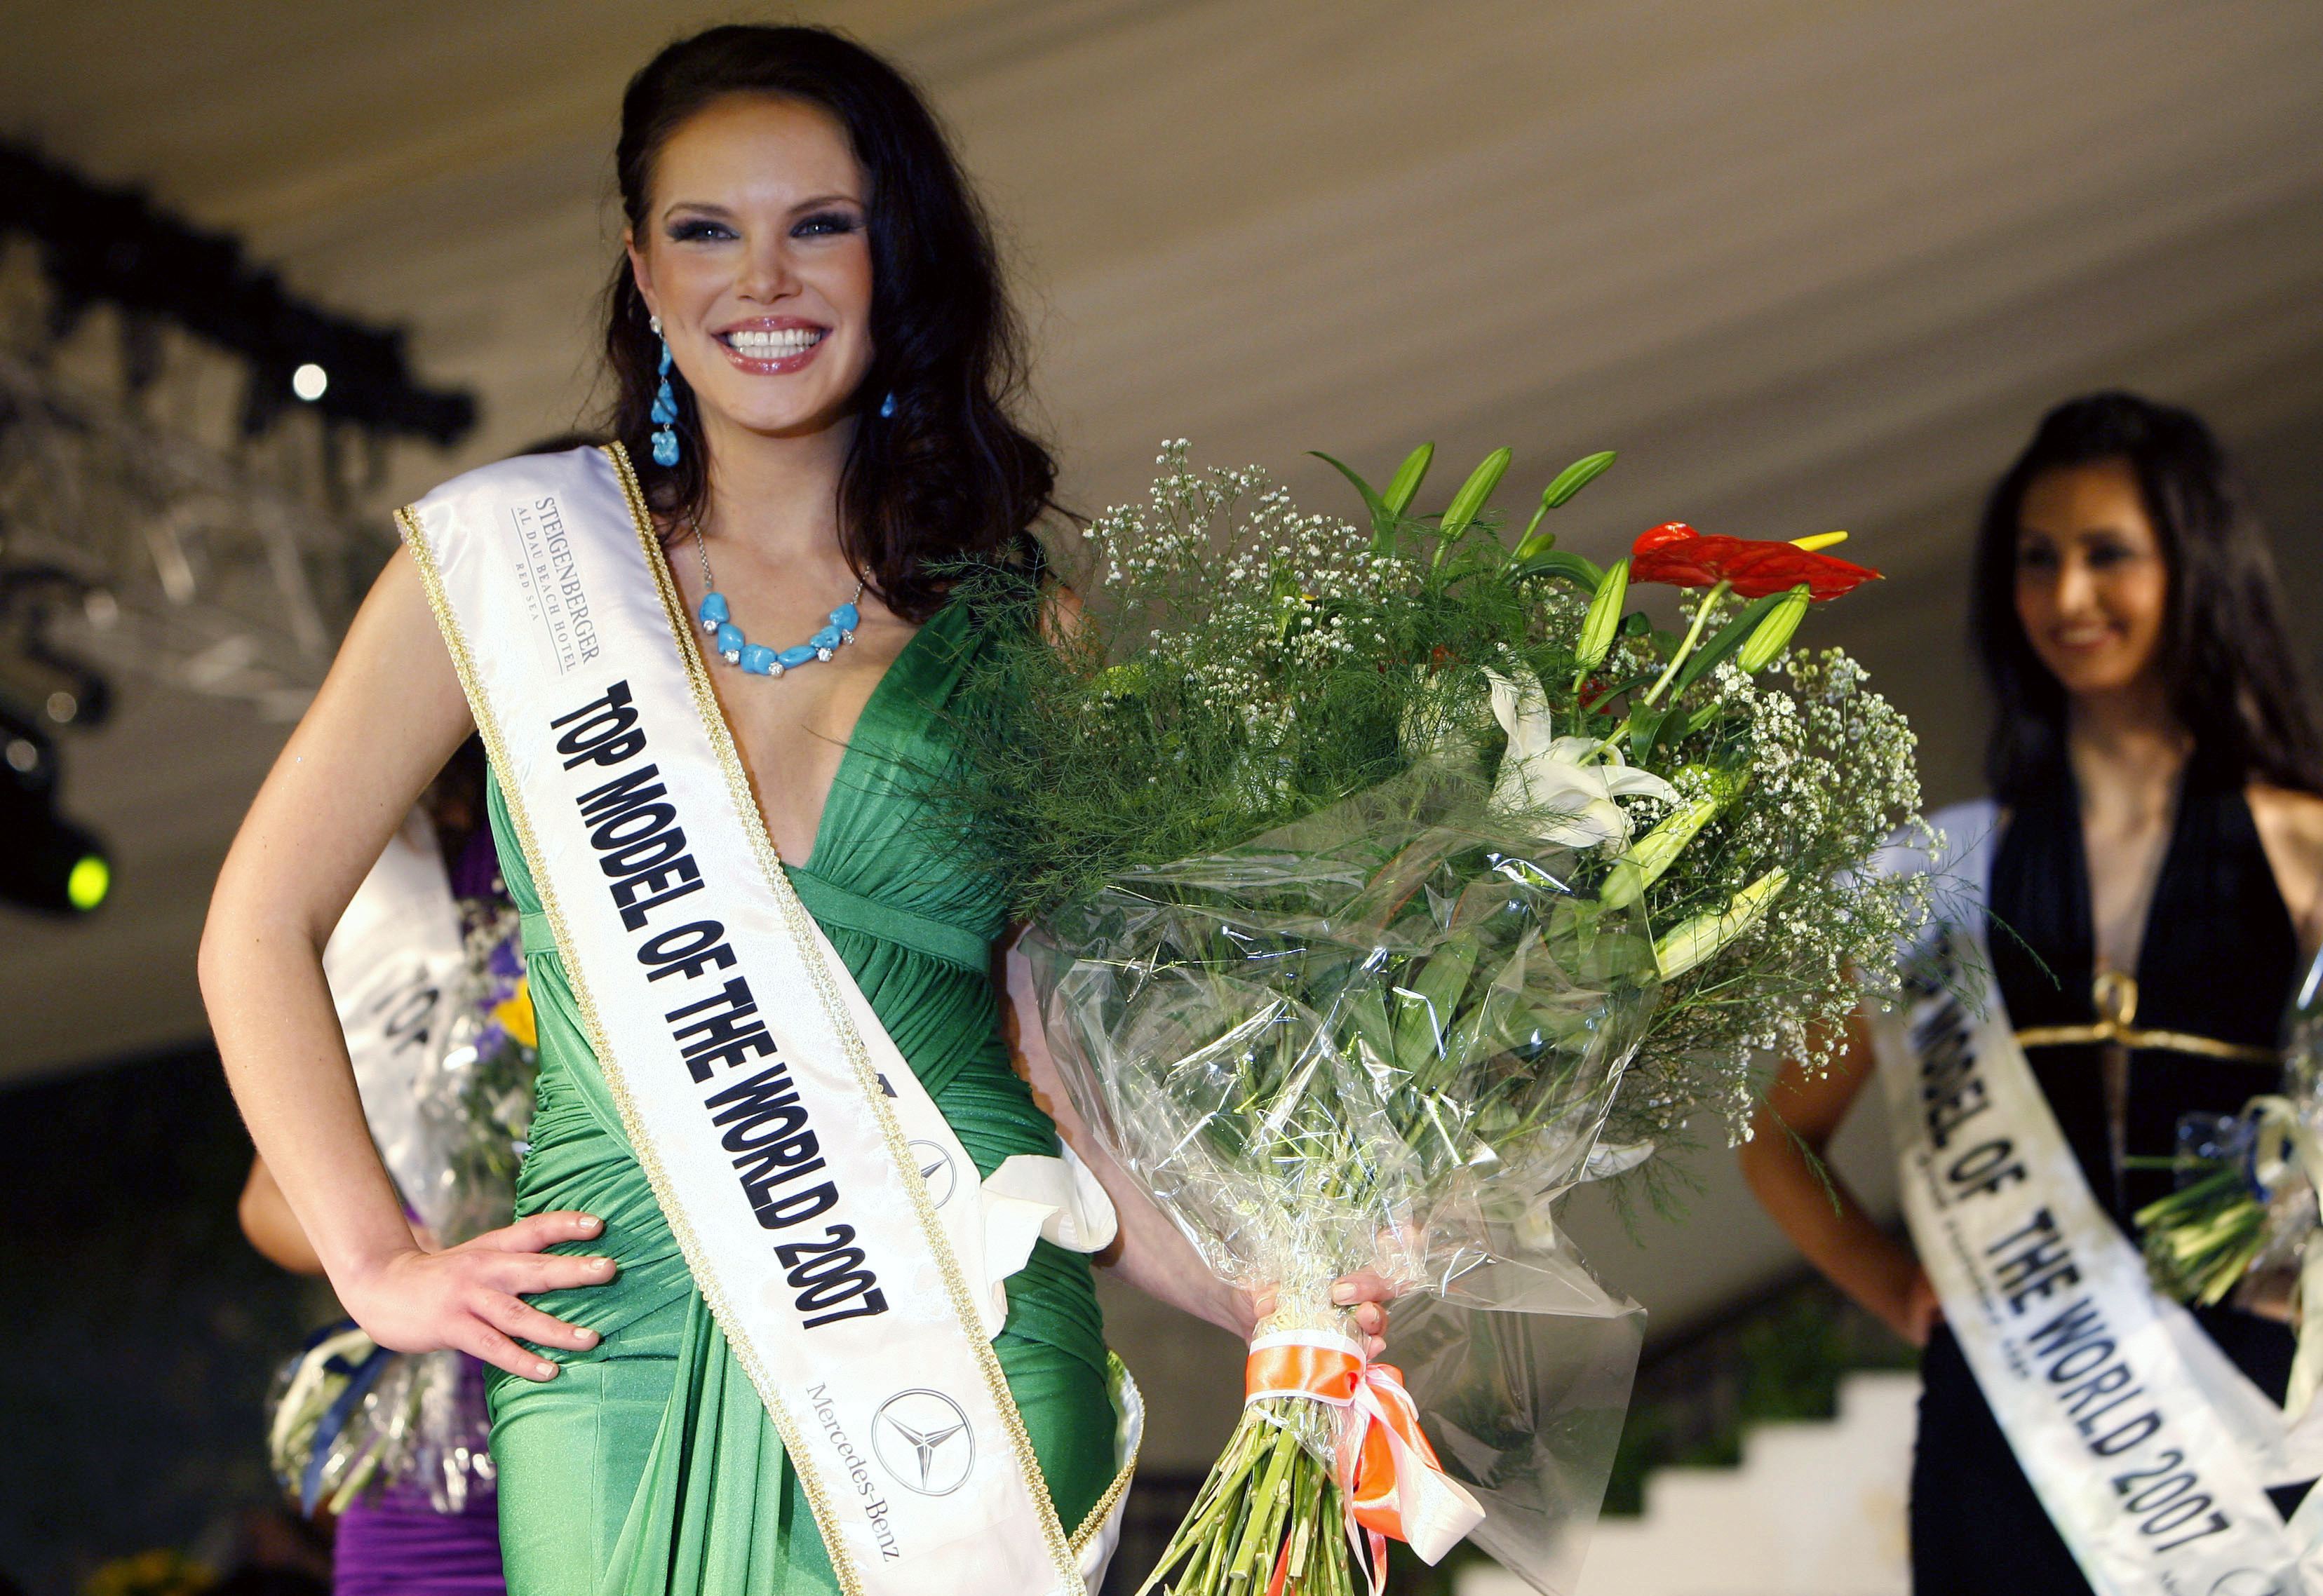 Alessandra Alores (Germany World 2009) excluded from Miss World pageant W020080121412758239192